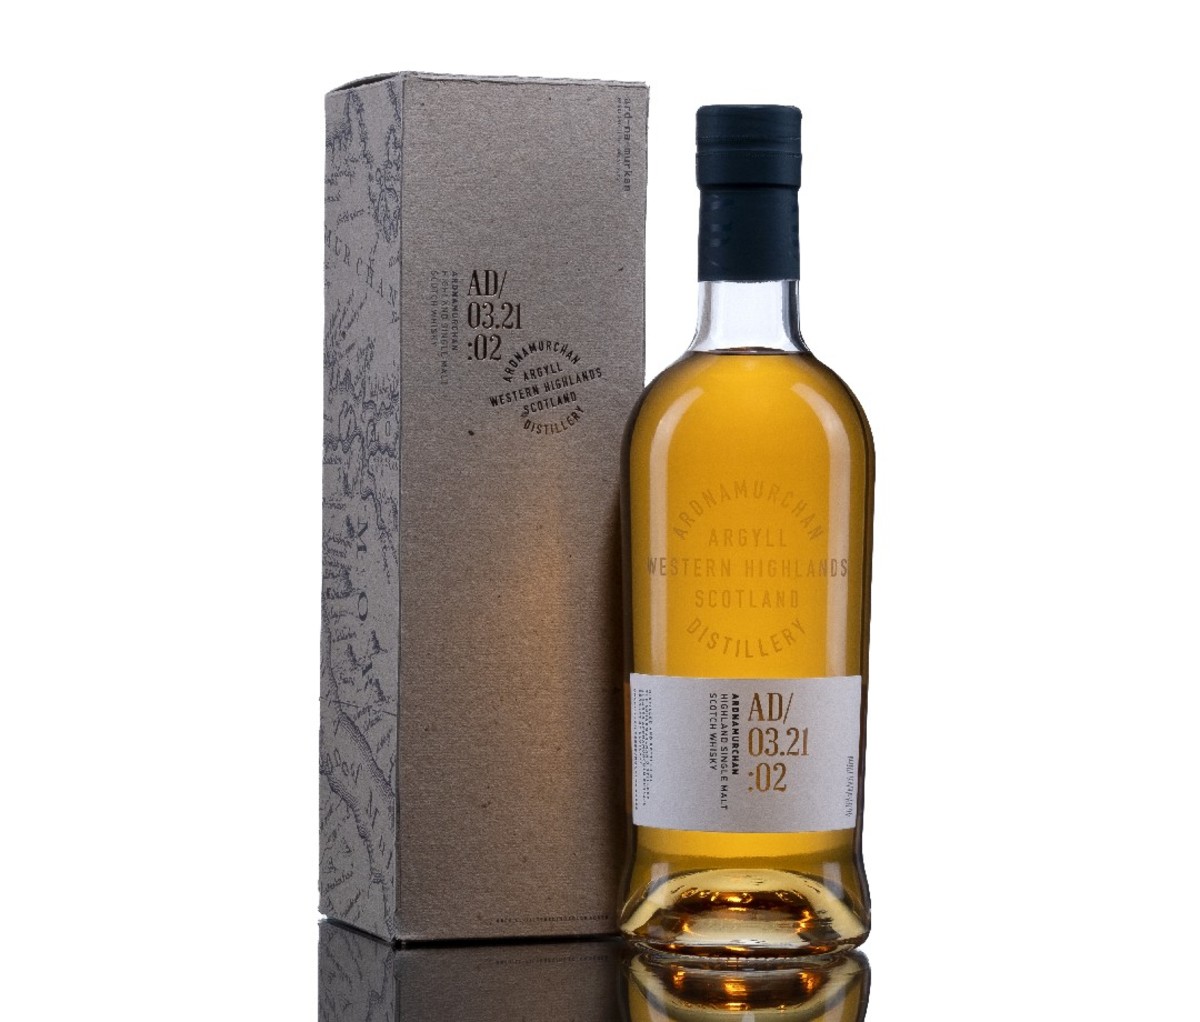 A box for Ardnamurchan Small Batch AD/03.21:01 scotch, standing next to a full bottle.